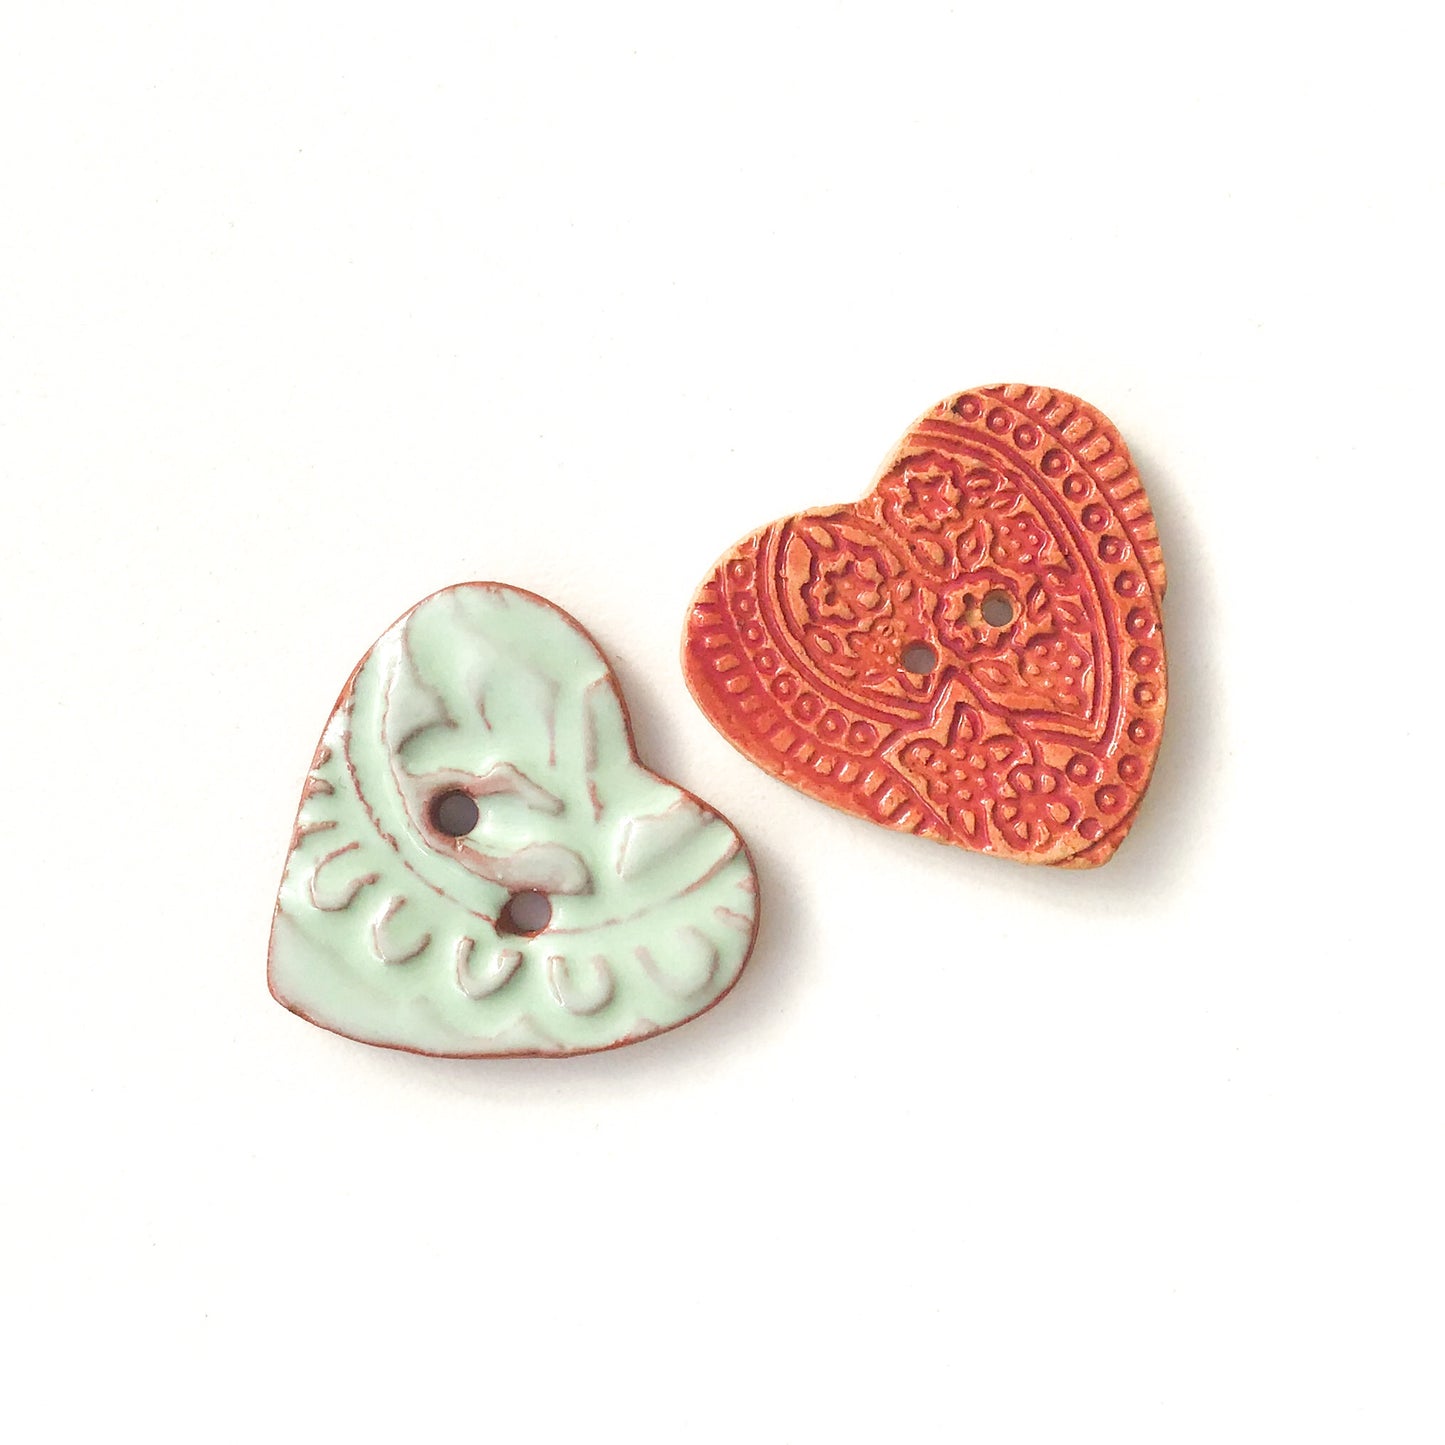 Stamped Heart Buttons - Ceramic Heart Buttons -1 3/16"